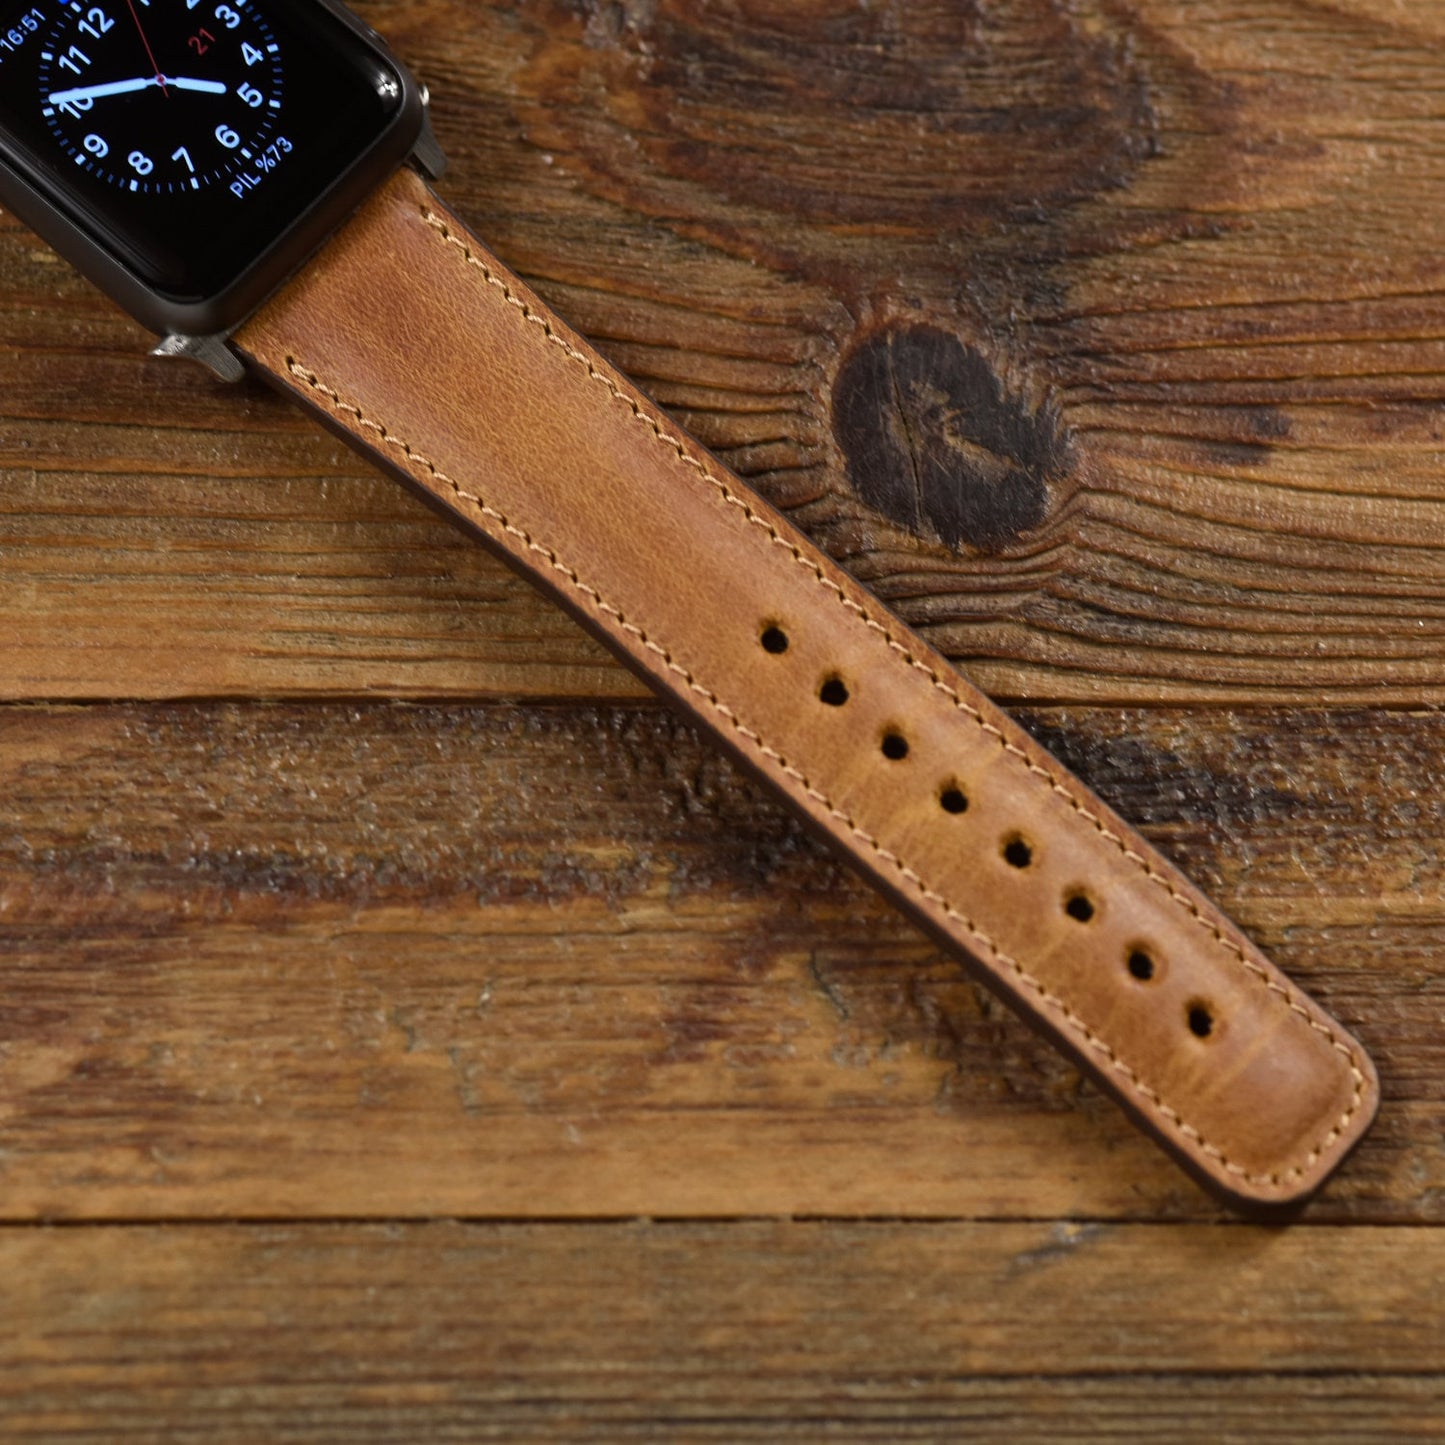 Anniversary Gift For Him, Genuine Brown Leather Apple Watch Band 42mm, 38mm, 40mm, 44mm for Series 1-2-3-4-5-6 & Se, Gift for Boyfriend